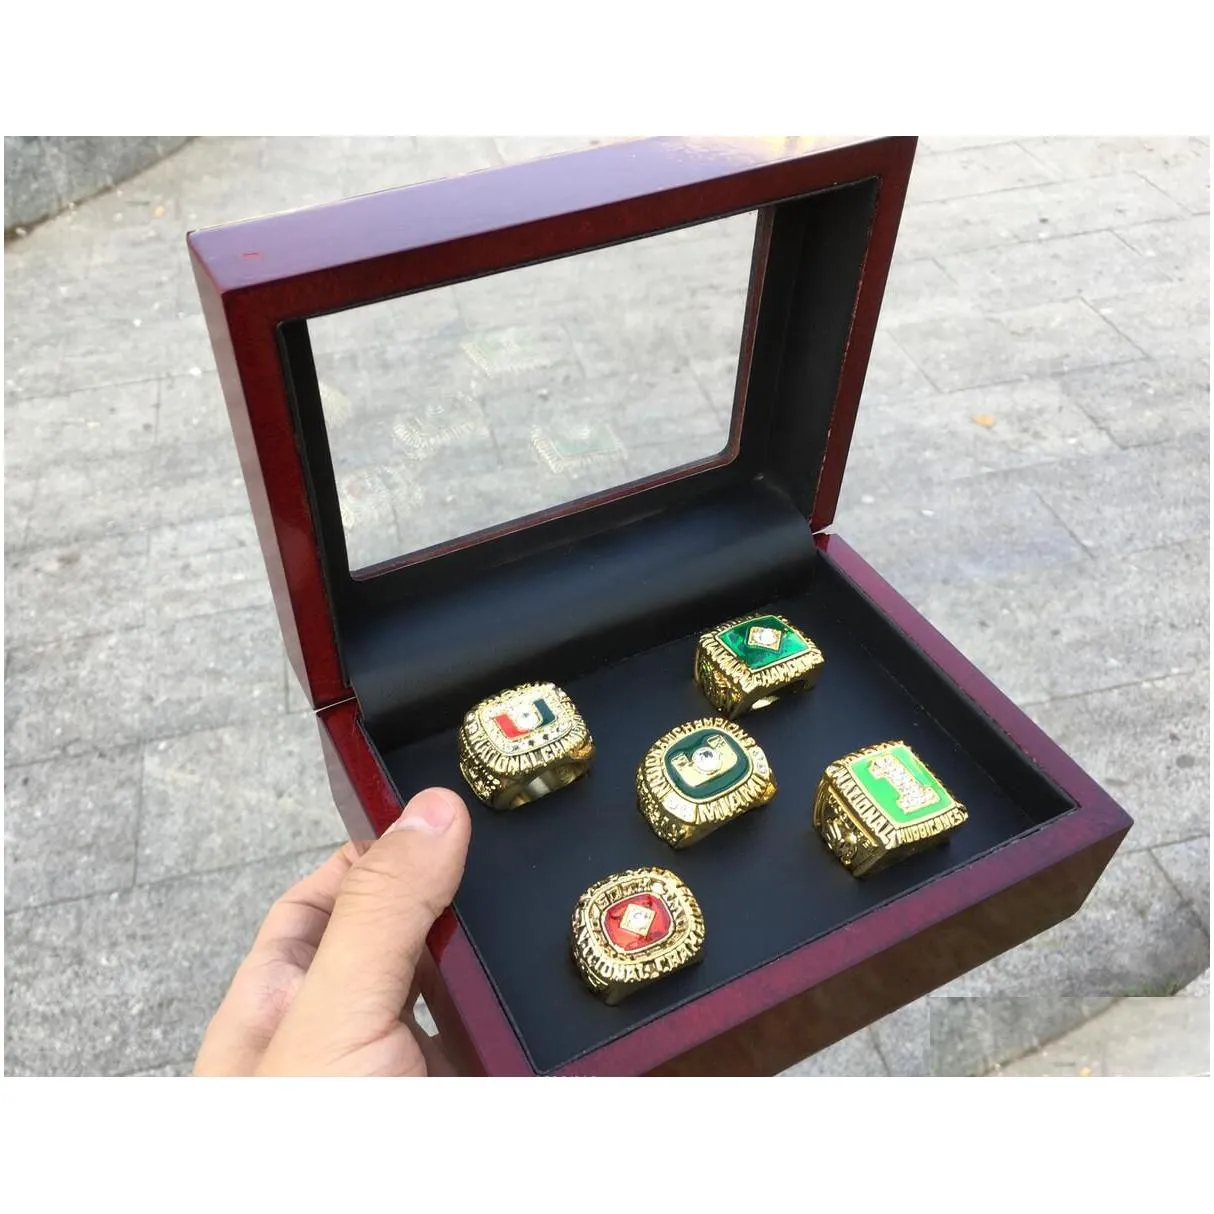 5 pcs 1983 1987 1989 1991 2001  hurricanes national championship ring set with wooden display box case fan gift 2019 drop